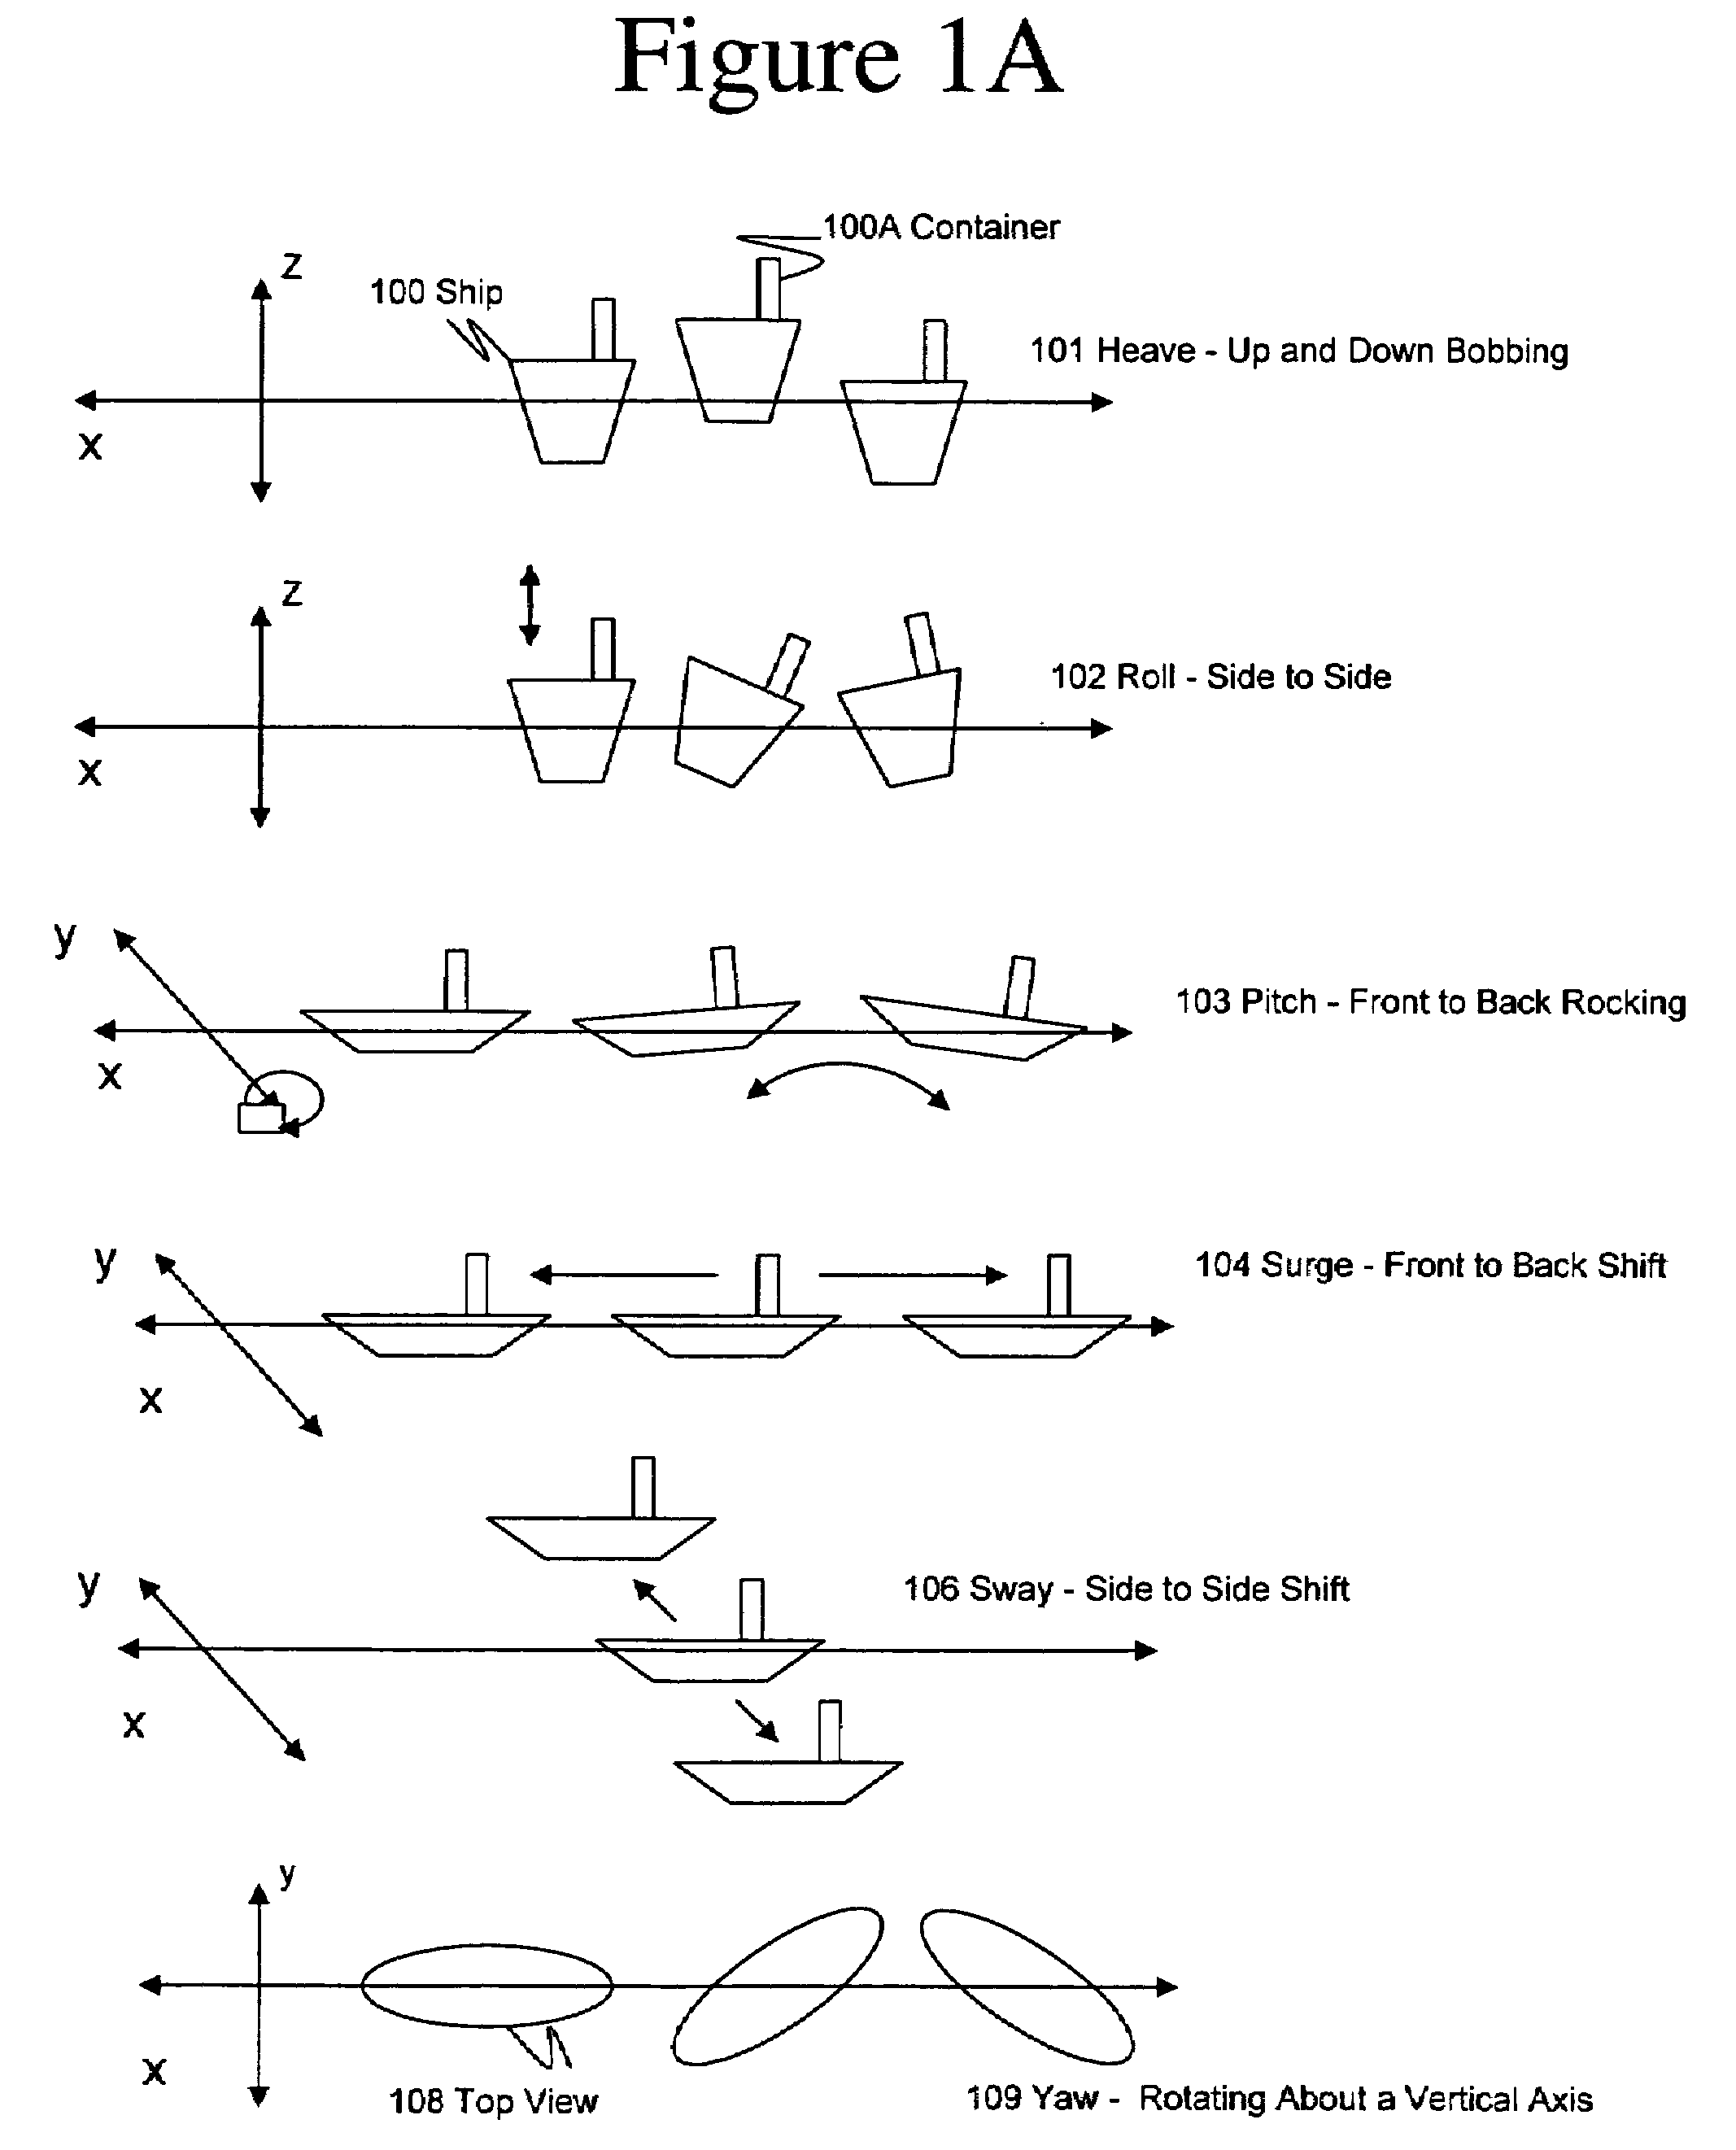 Process control architecture with hydrodynamic correction